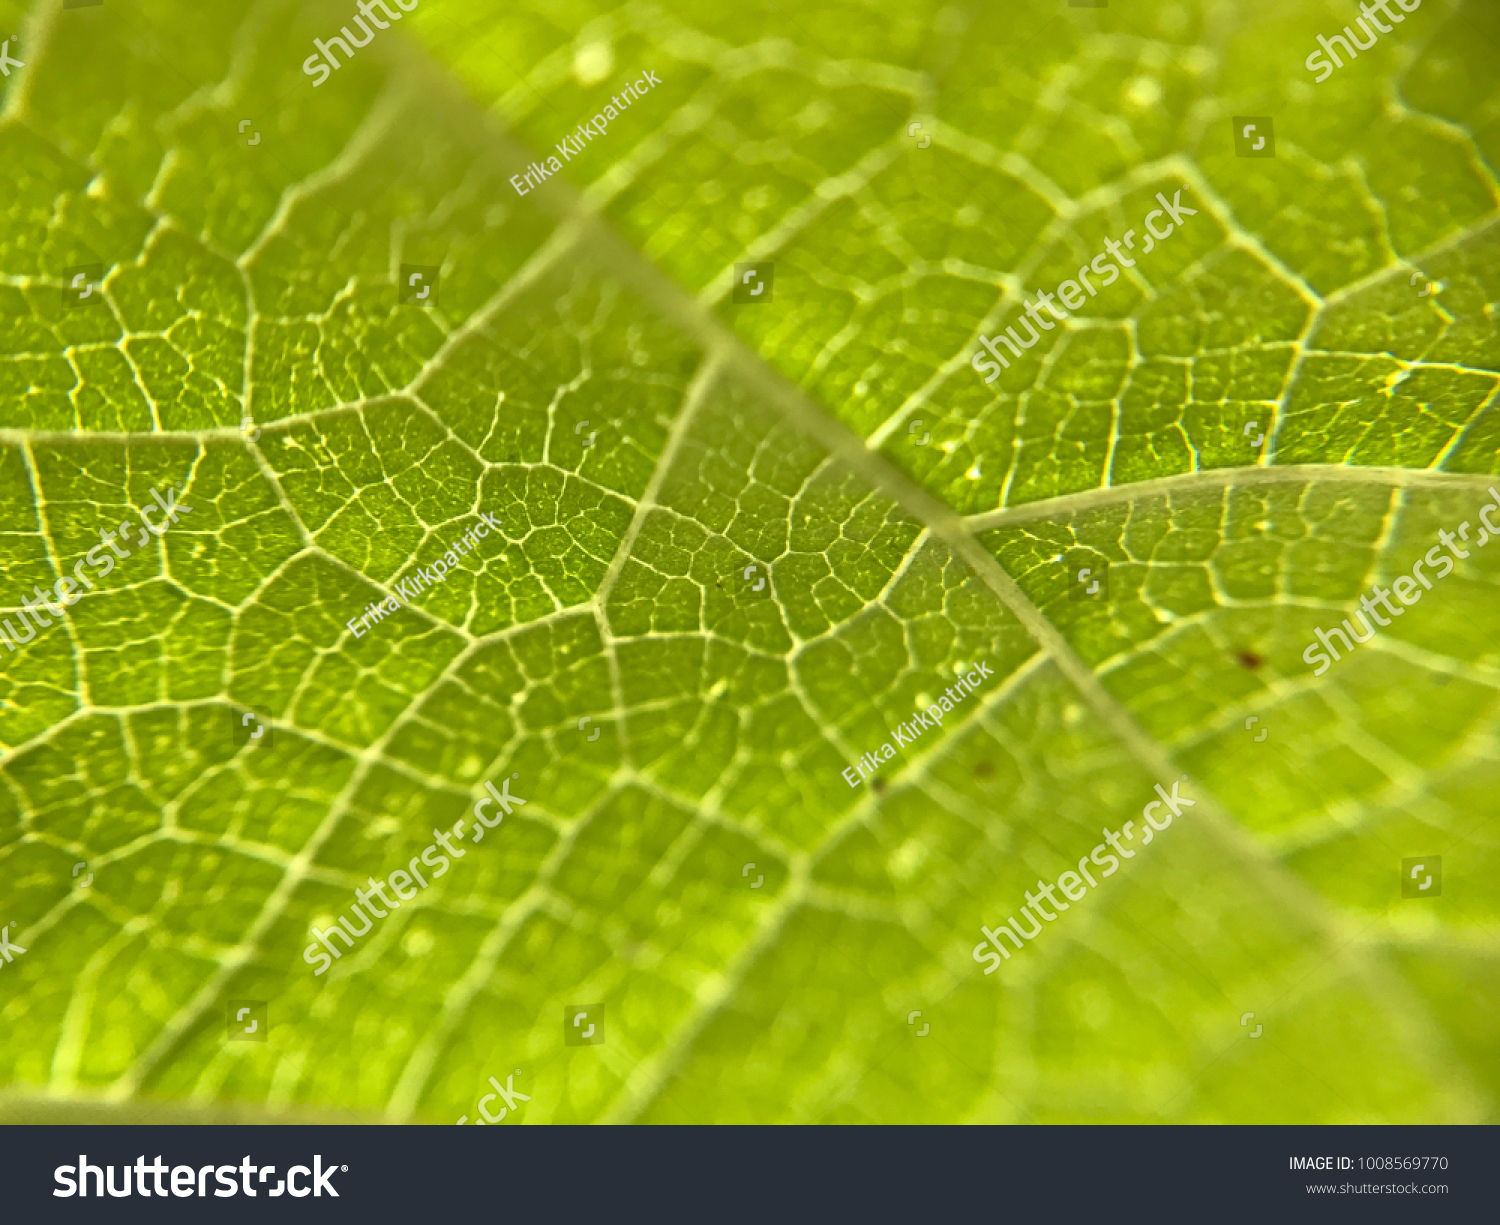 Mulberry Leaf Veins Stock Photo 1008569770 | Shutterstock